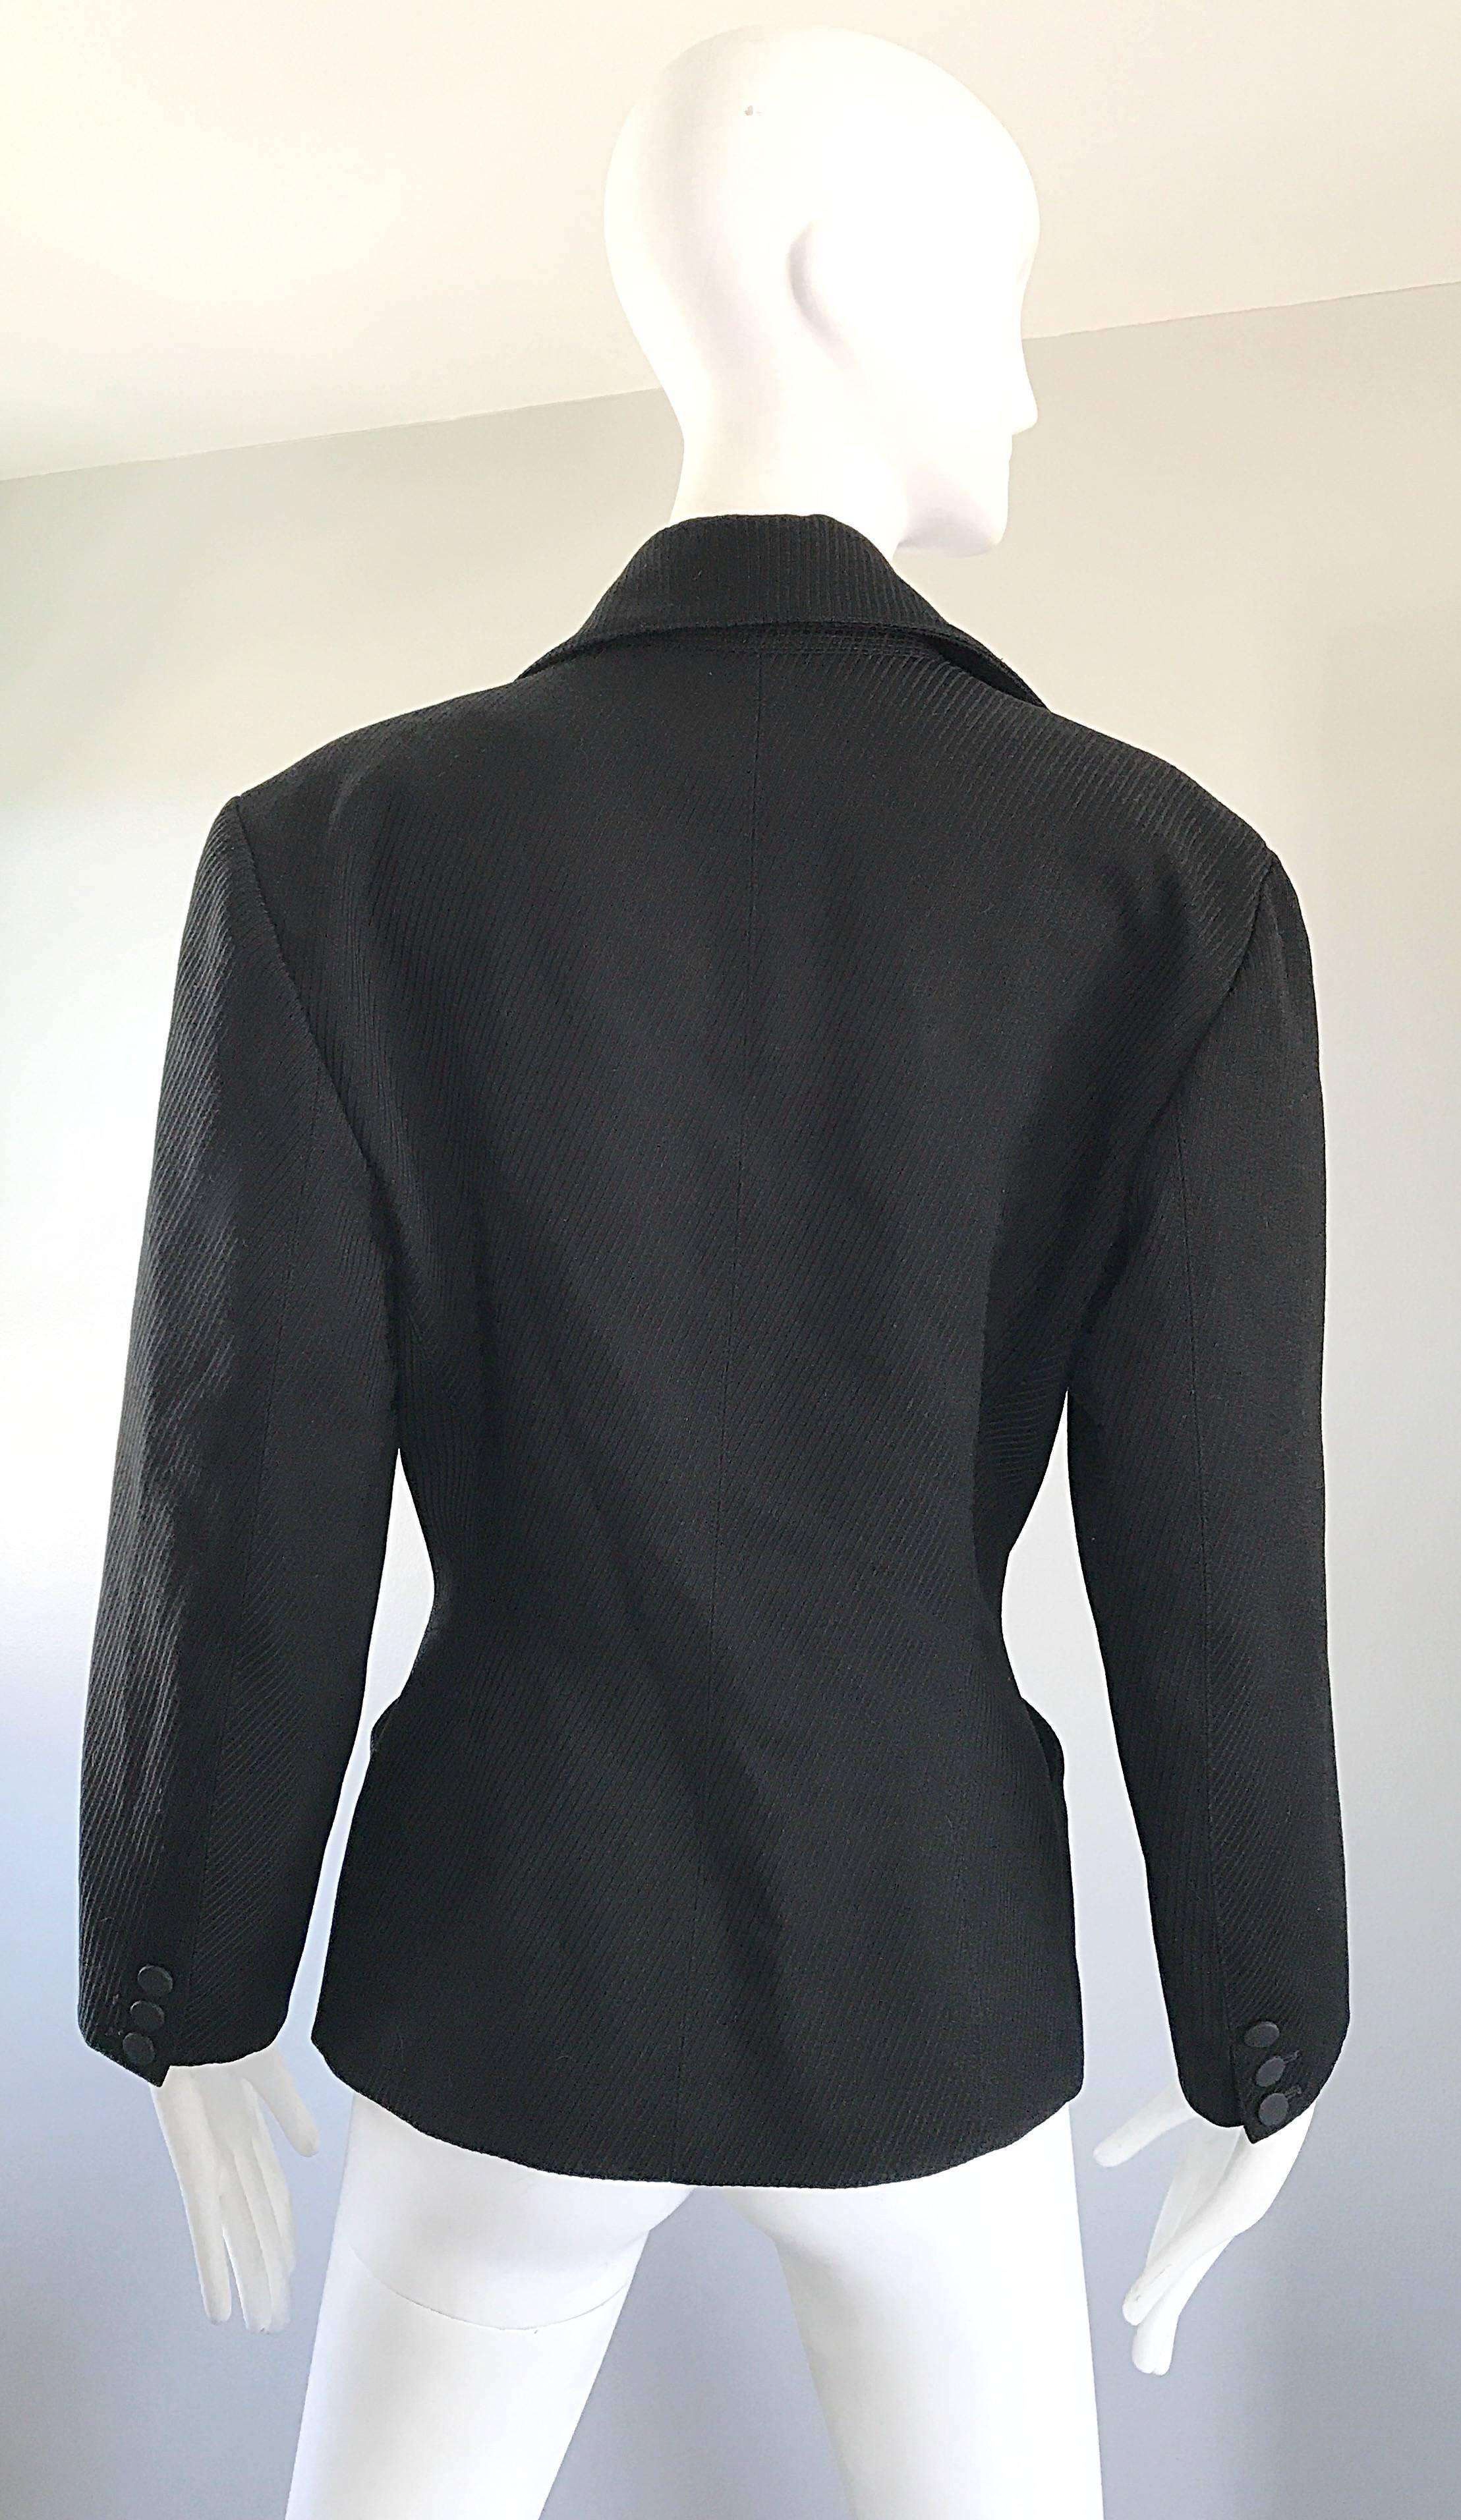 Rare Vintage Alaia 1980s Musuem Held Avant Garde Wasp Waist 80s Fitted Jacket For Sale 2